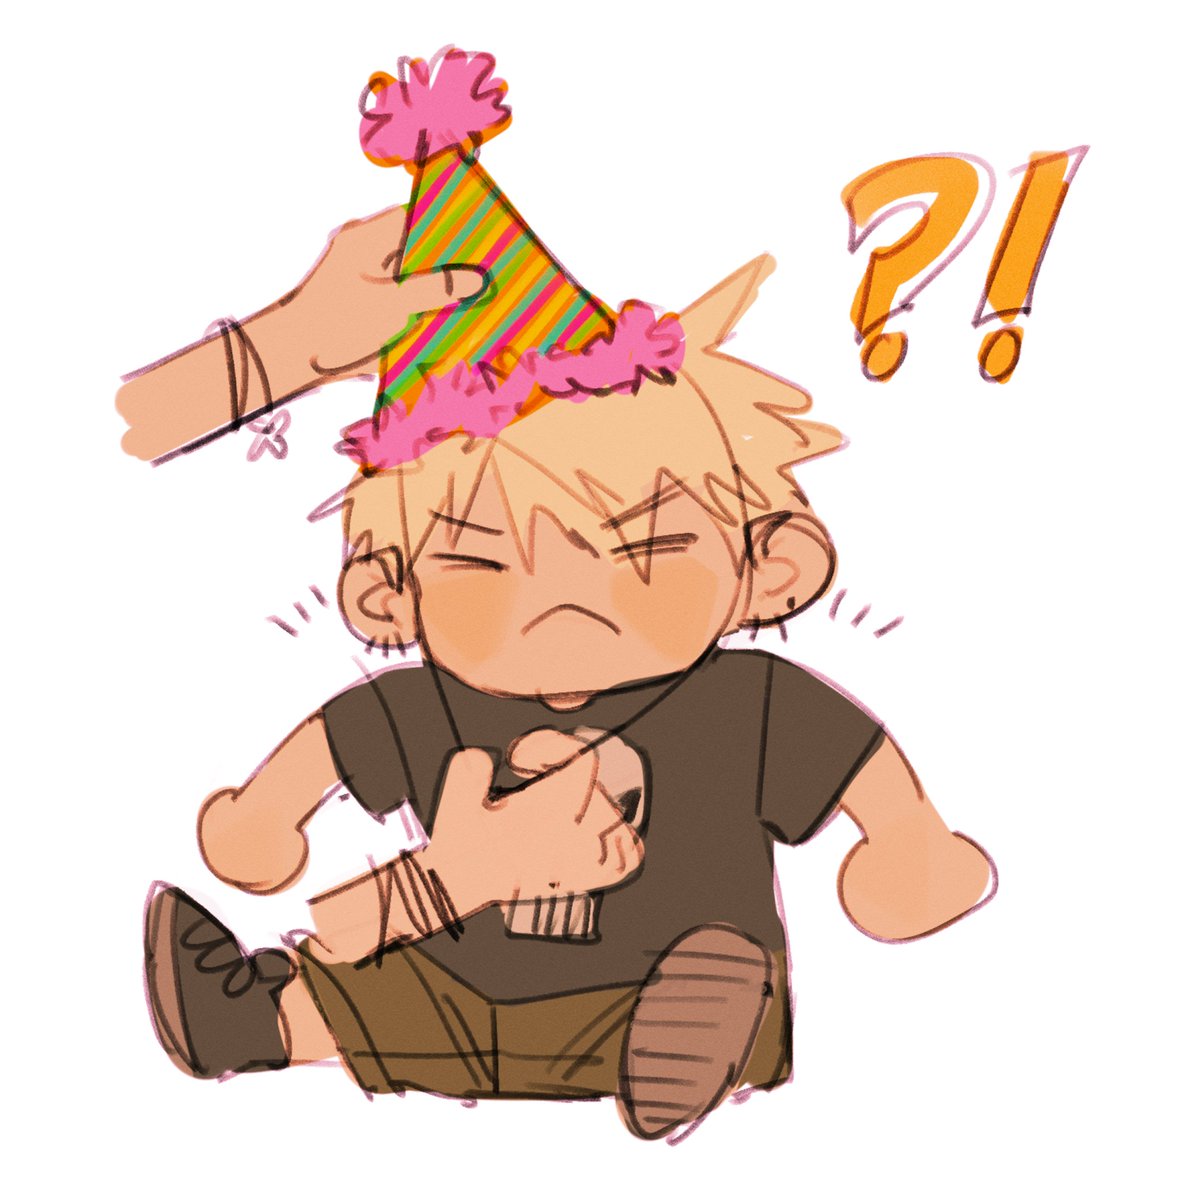 「happy bday kacchan of the bakugos 」|shonen connoisseurのイラスト